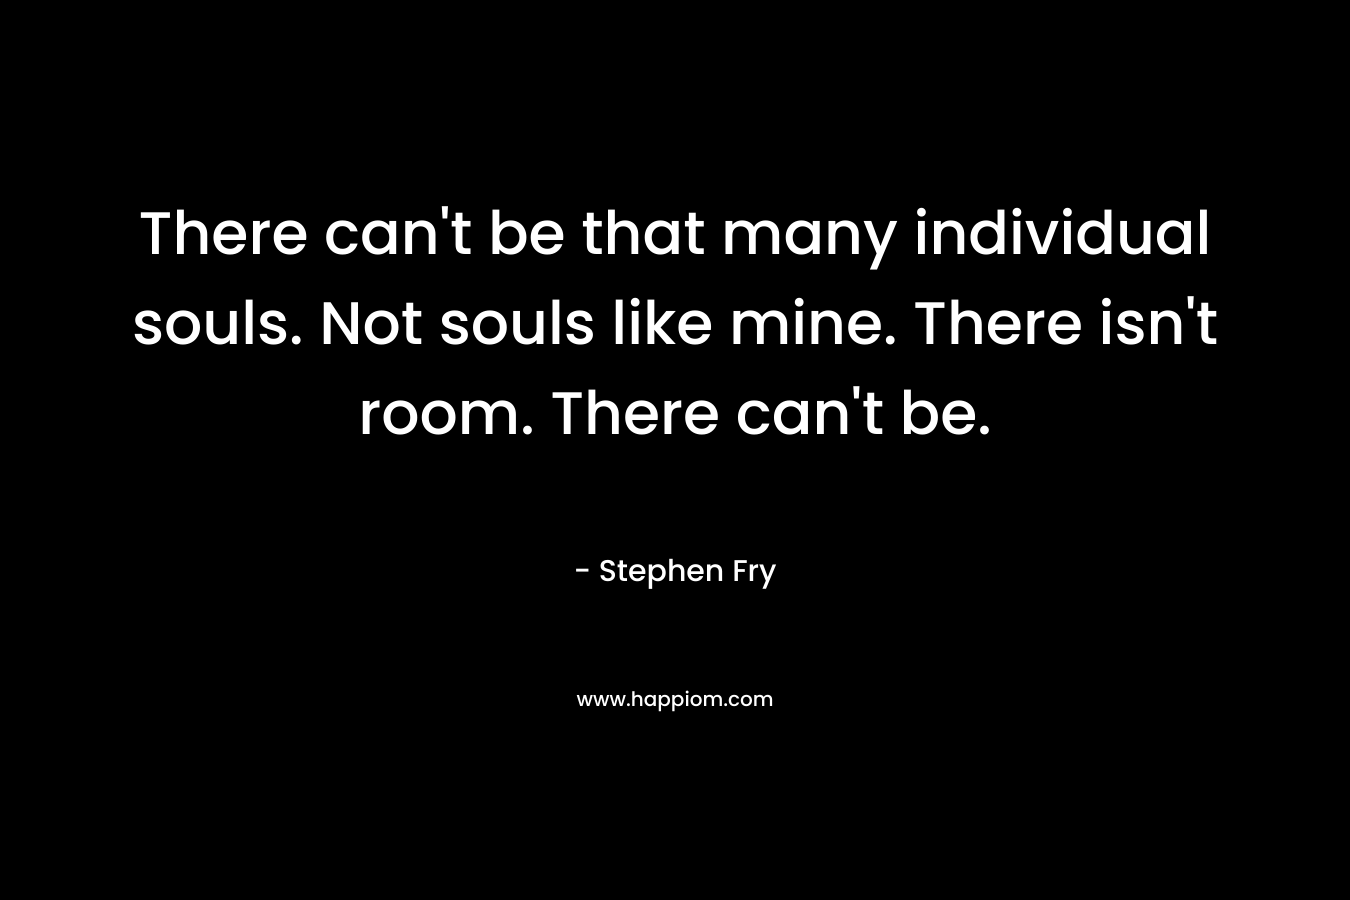 There can’t be that many individual souls. Not souls like mine. There isn’t room. There can’t be. – Stephen Fry